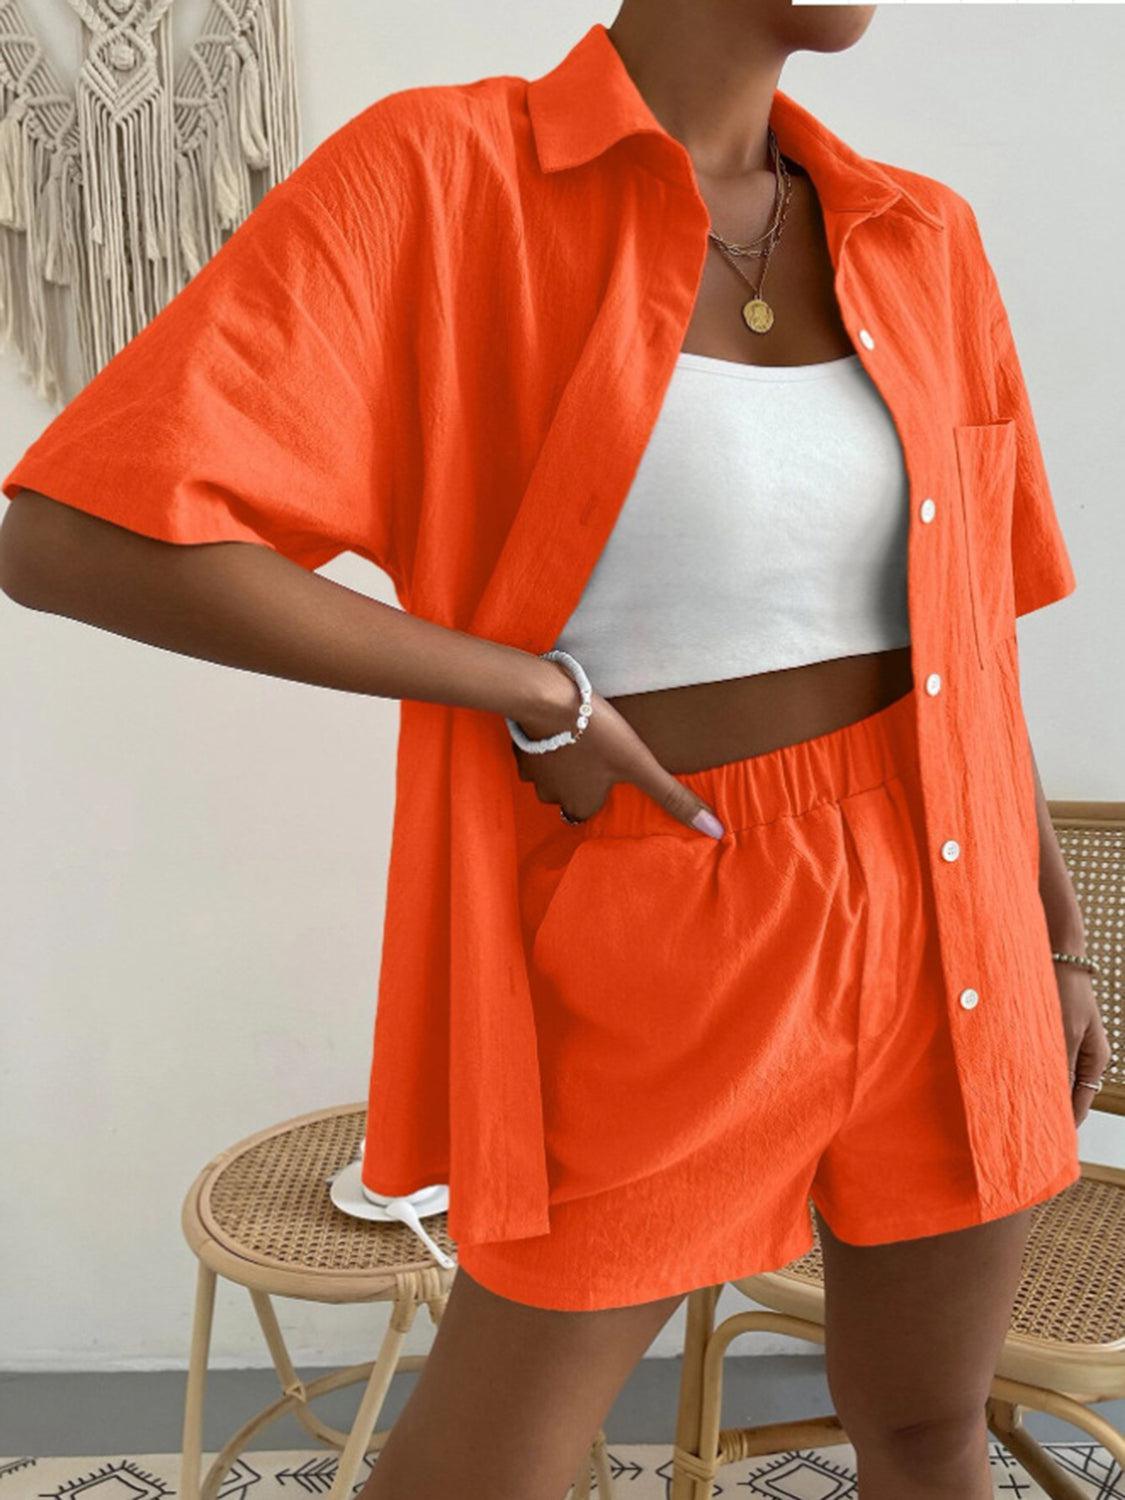 a woman wearing an orange jacket and shorts